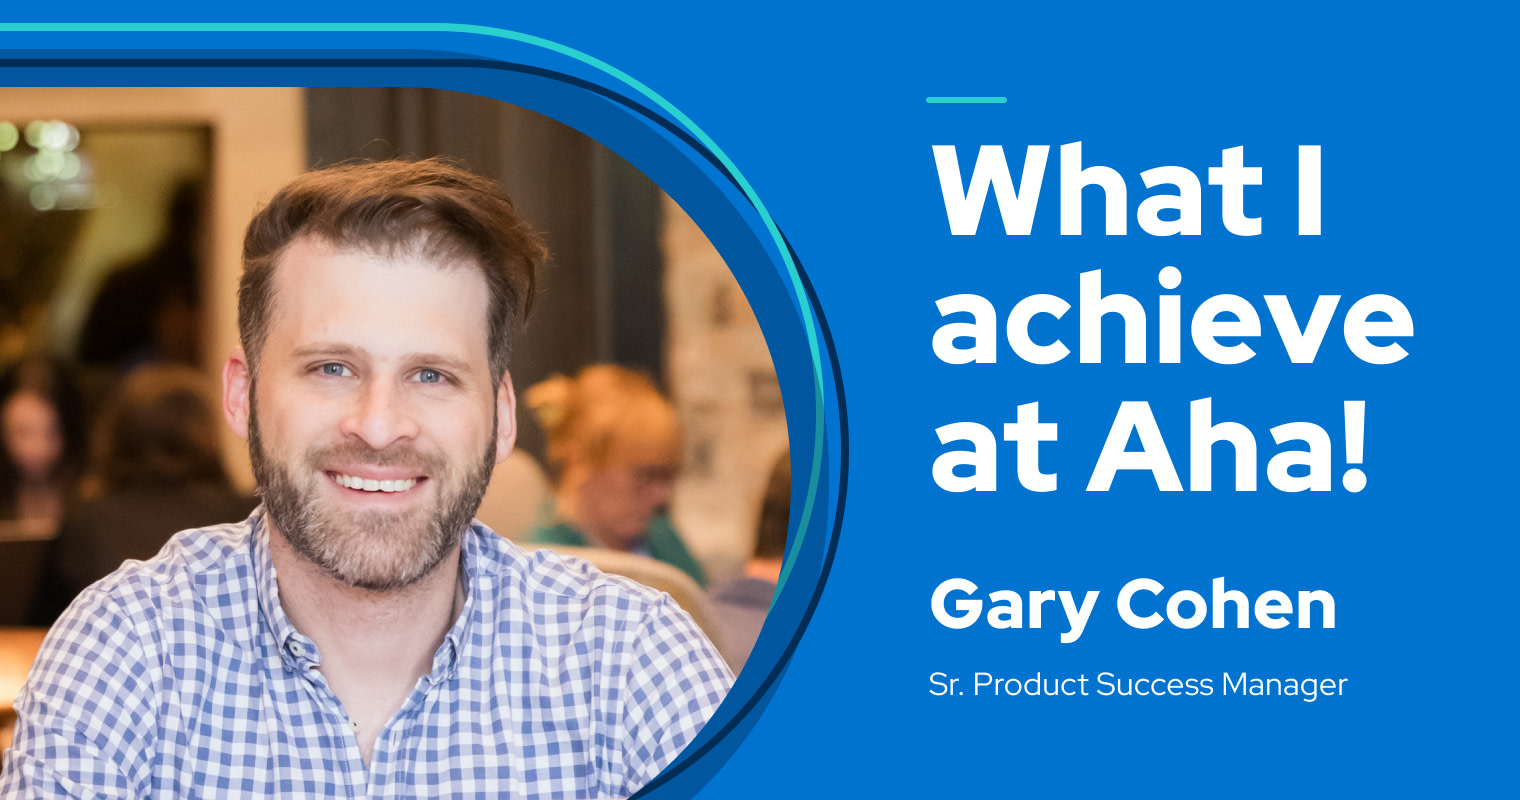 My name is Gary Cohen — this is what I achieve at Aha!